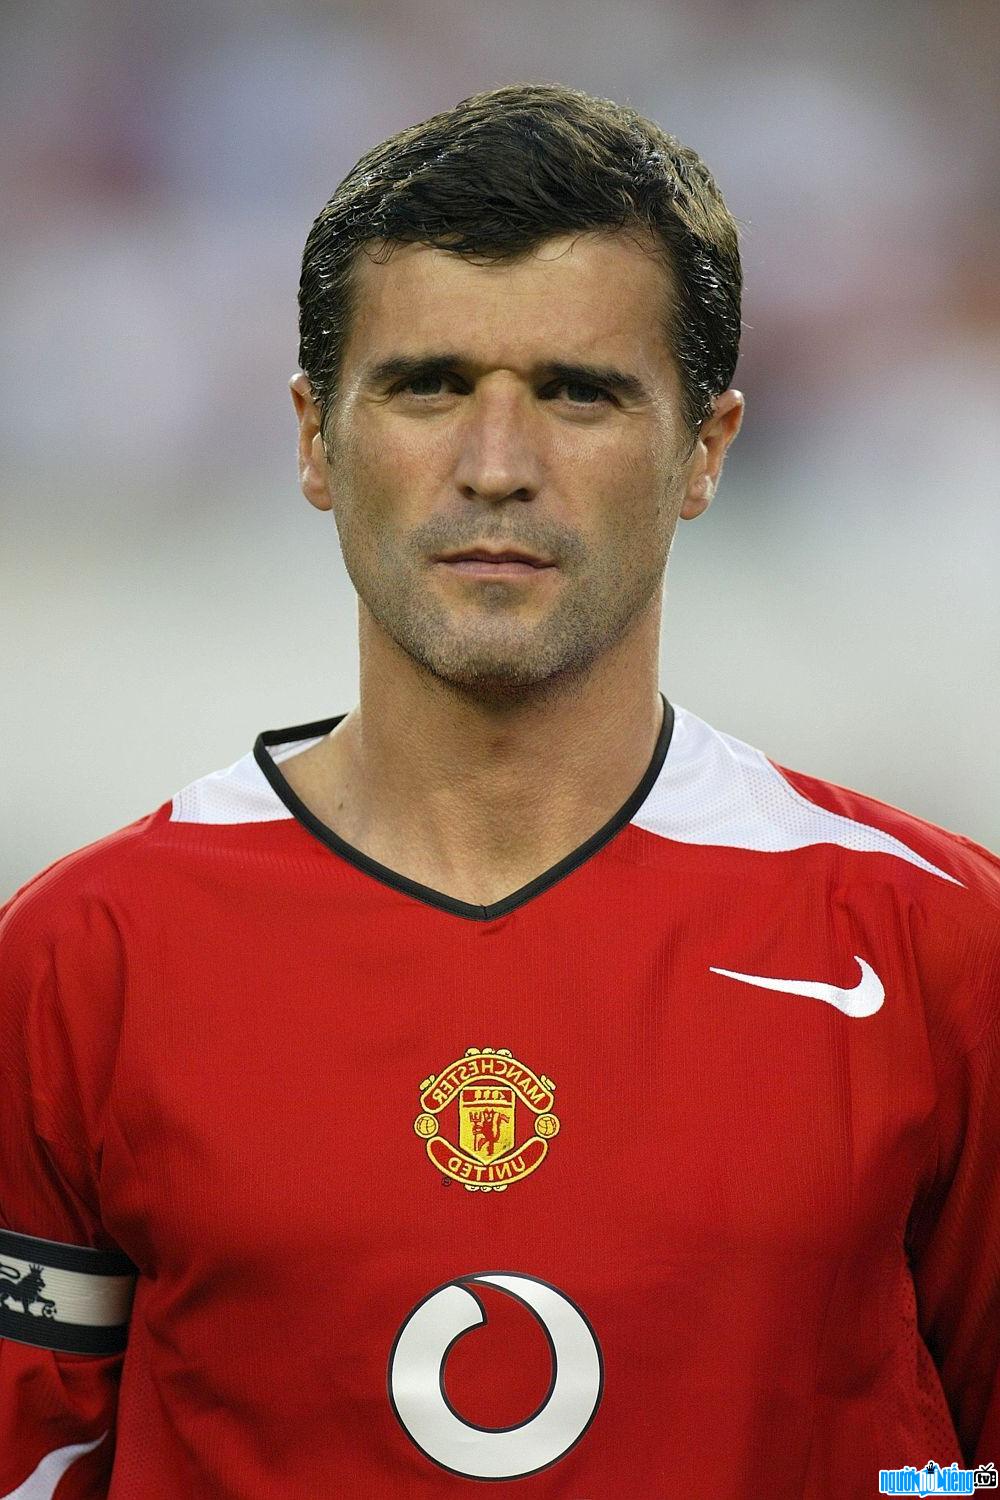  Image of player Roy Keane in his youth